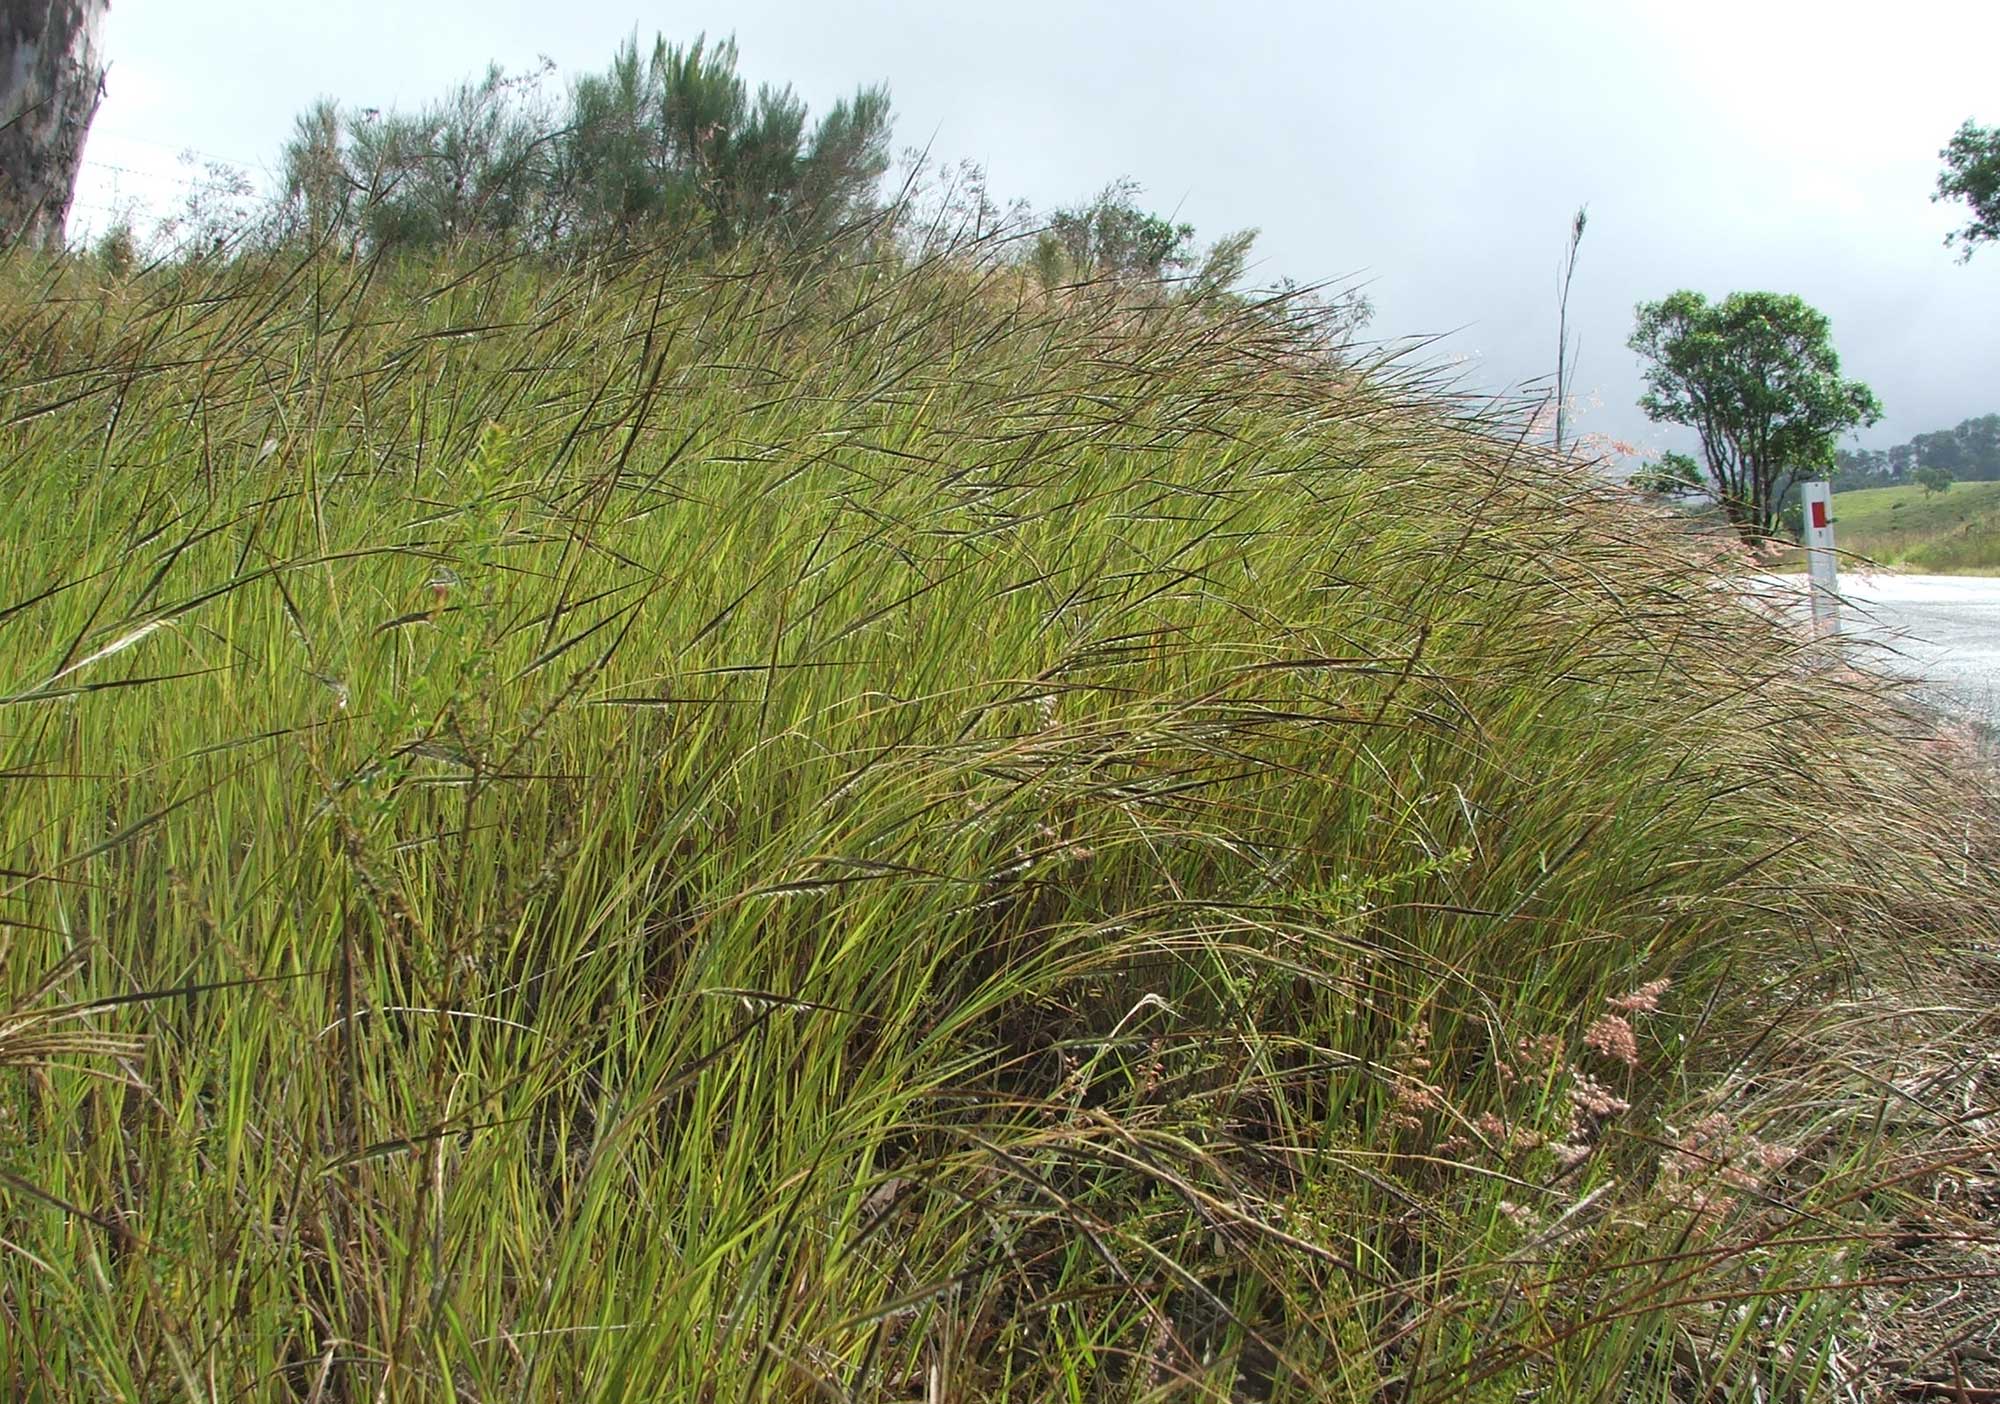 Photograph of tangelhead growing near a roadside in Australia. The photo shows tall grass plants gracefully arcing to the right, each with a dark-colored inflorescence. A bit of road can be seen at the right side of the image in the middle ground. 